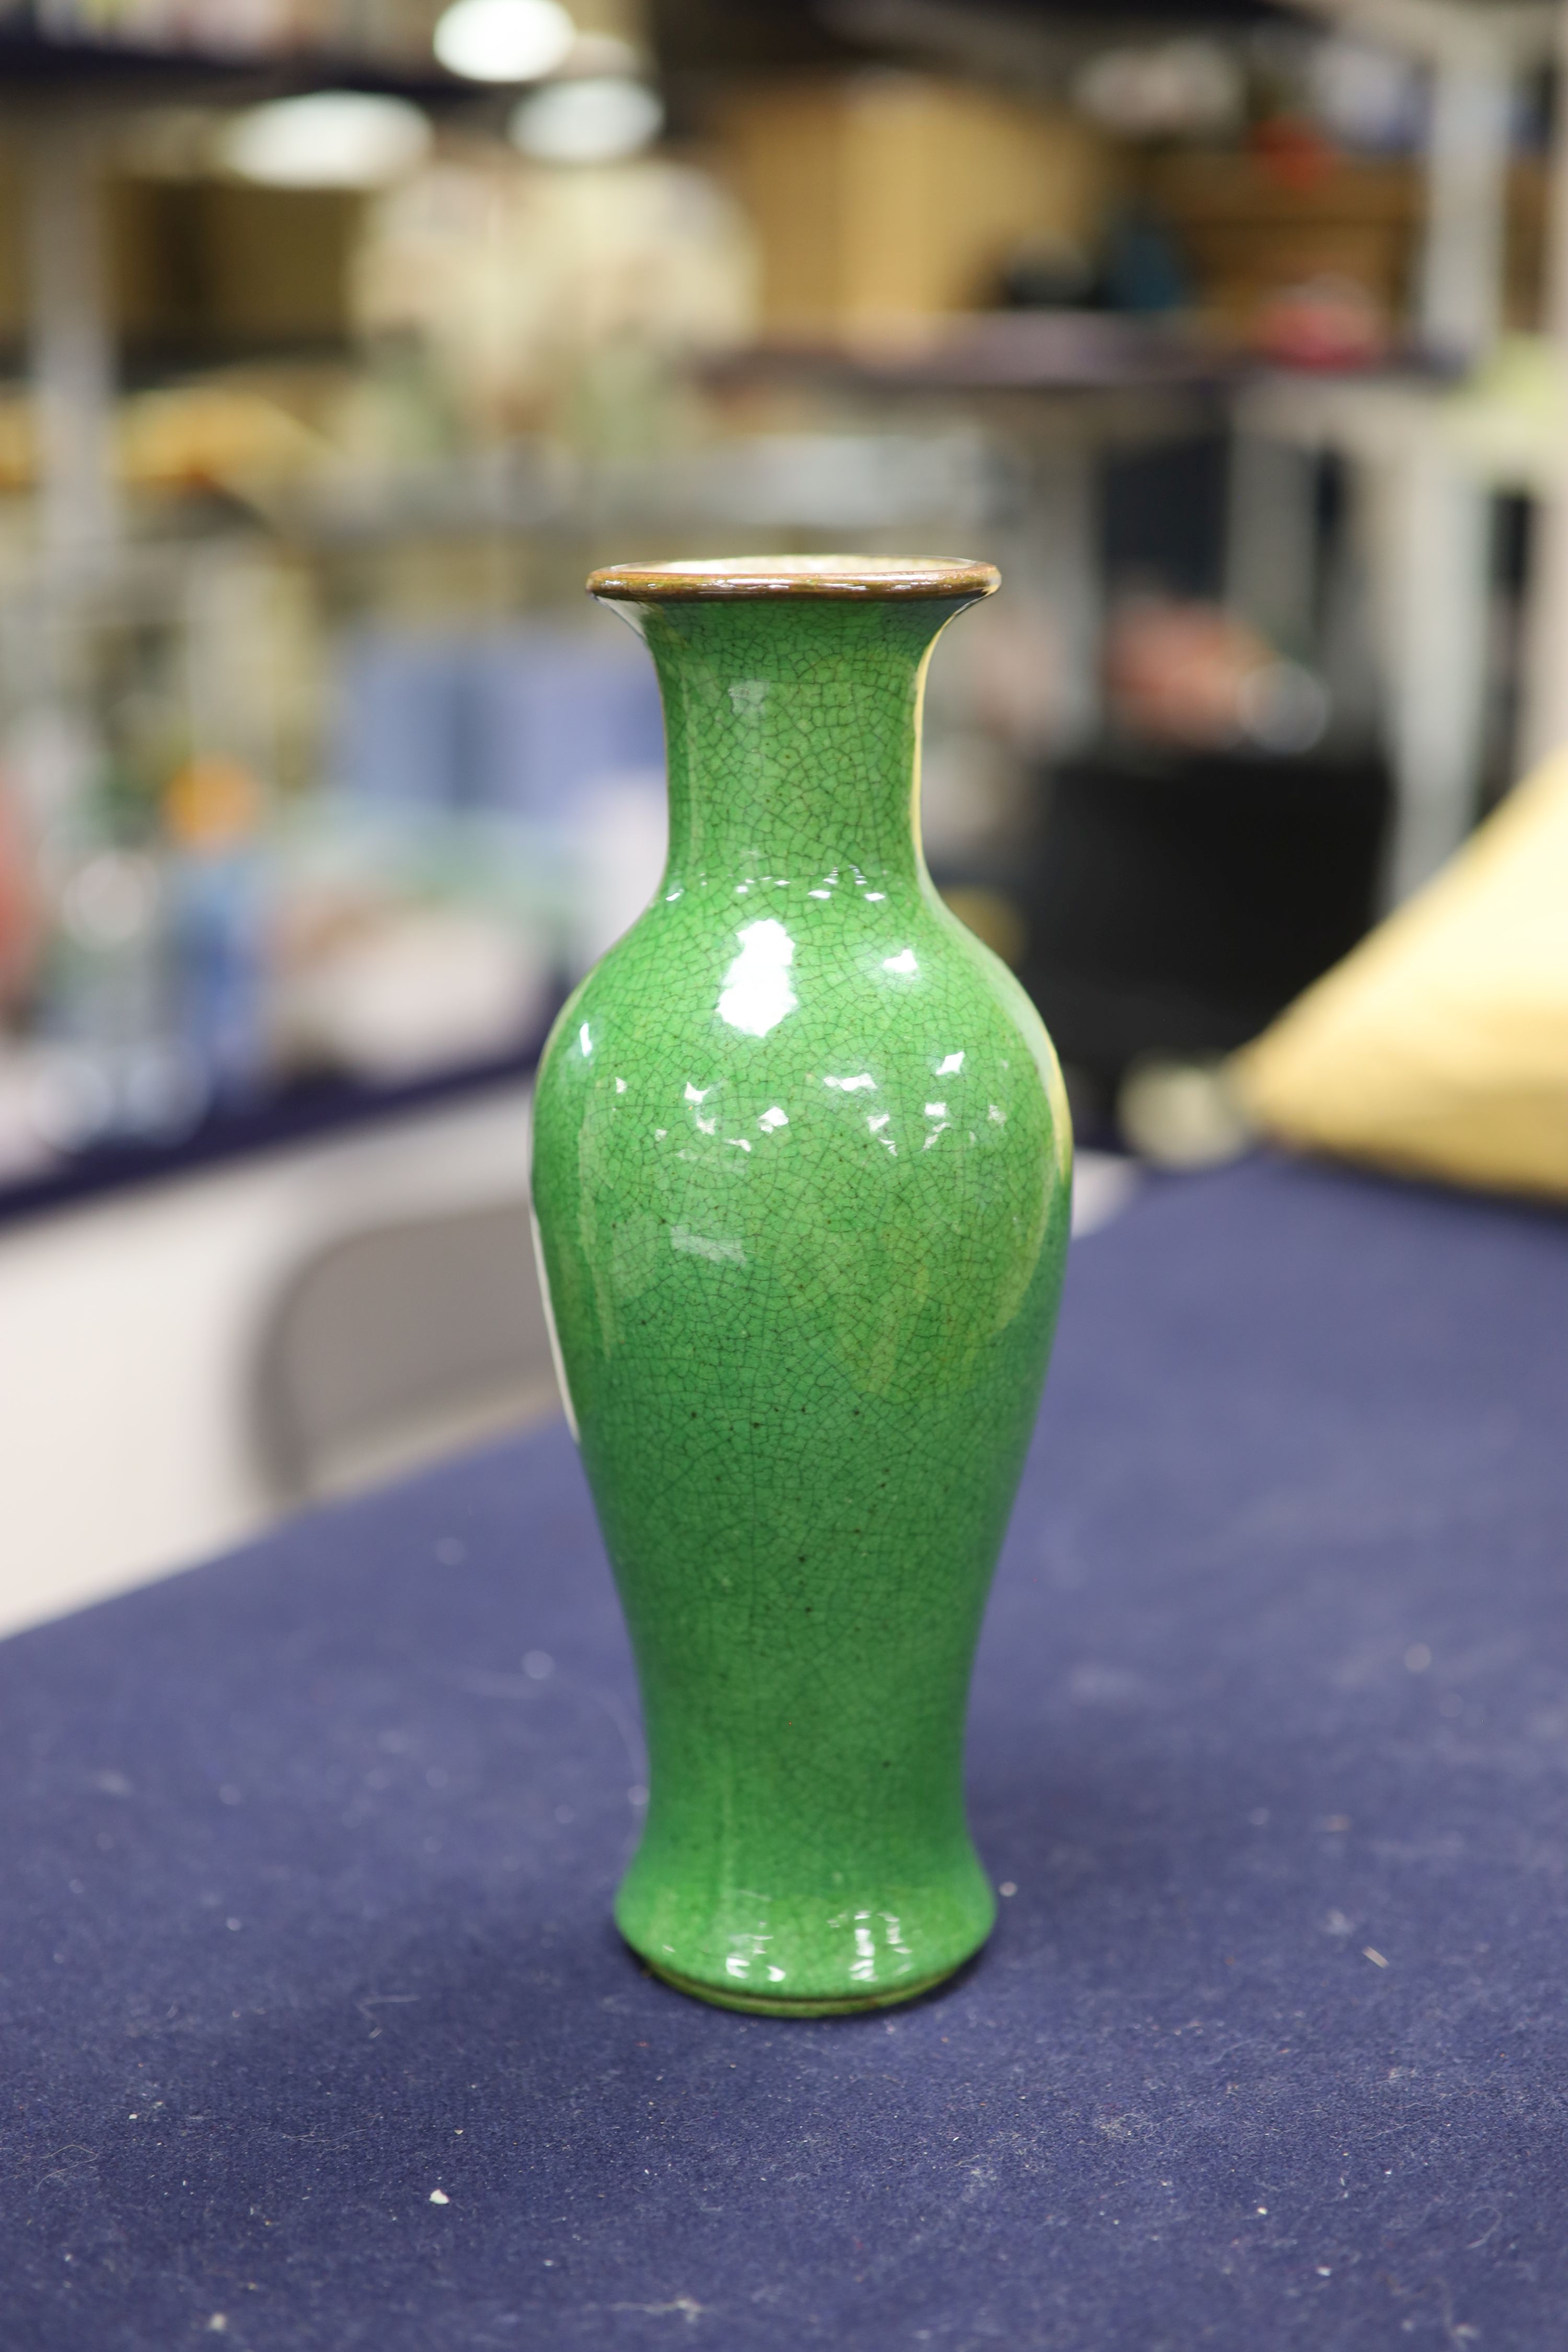 A Chinese green crackle glaze vase, height 23cm